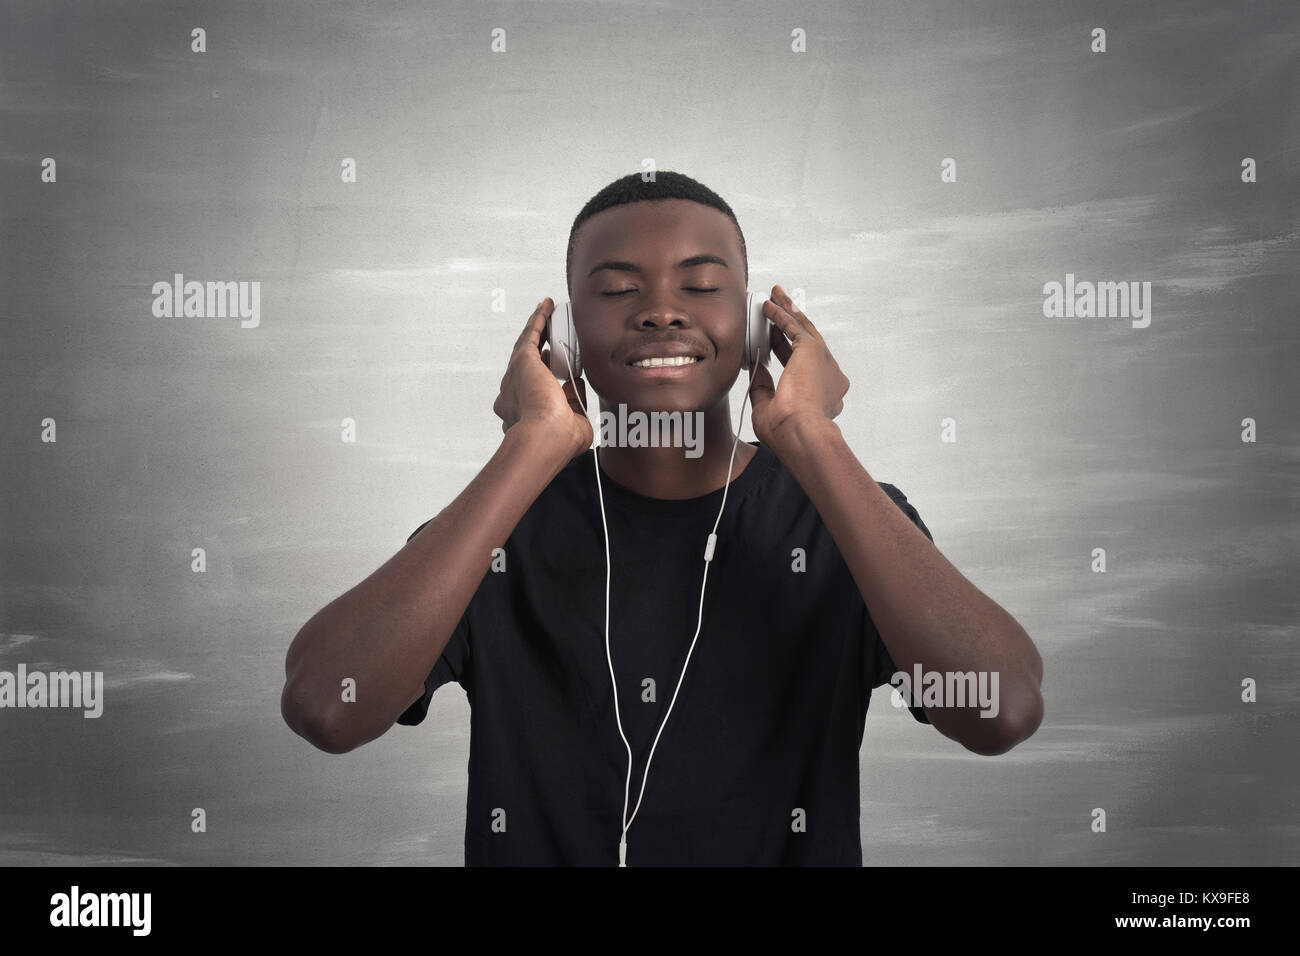 Happy african man smiling listening to music in headphones. Grey background. Stock Photo